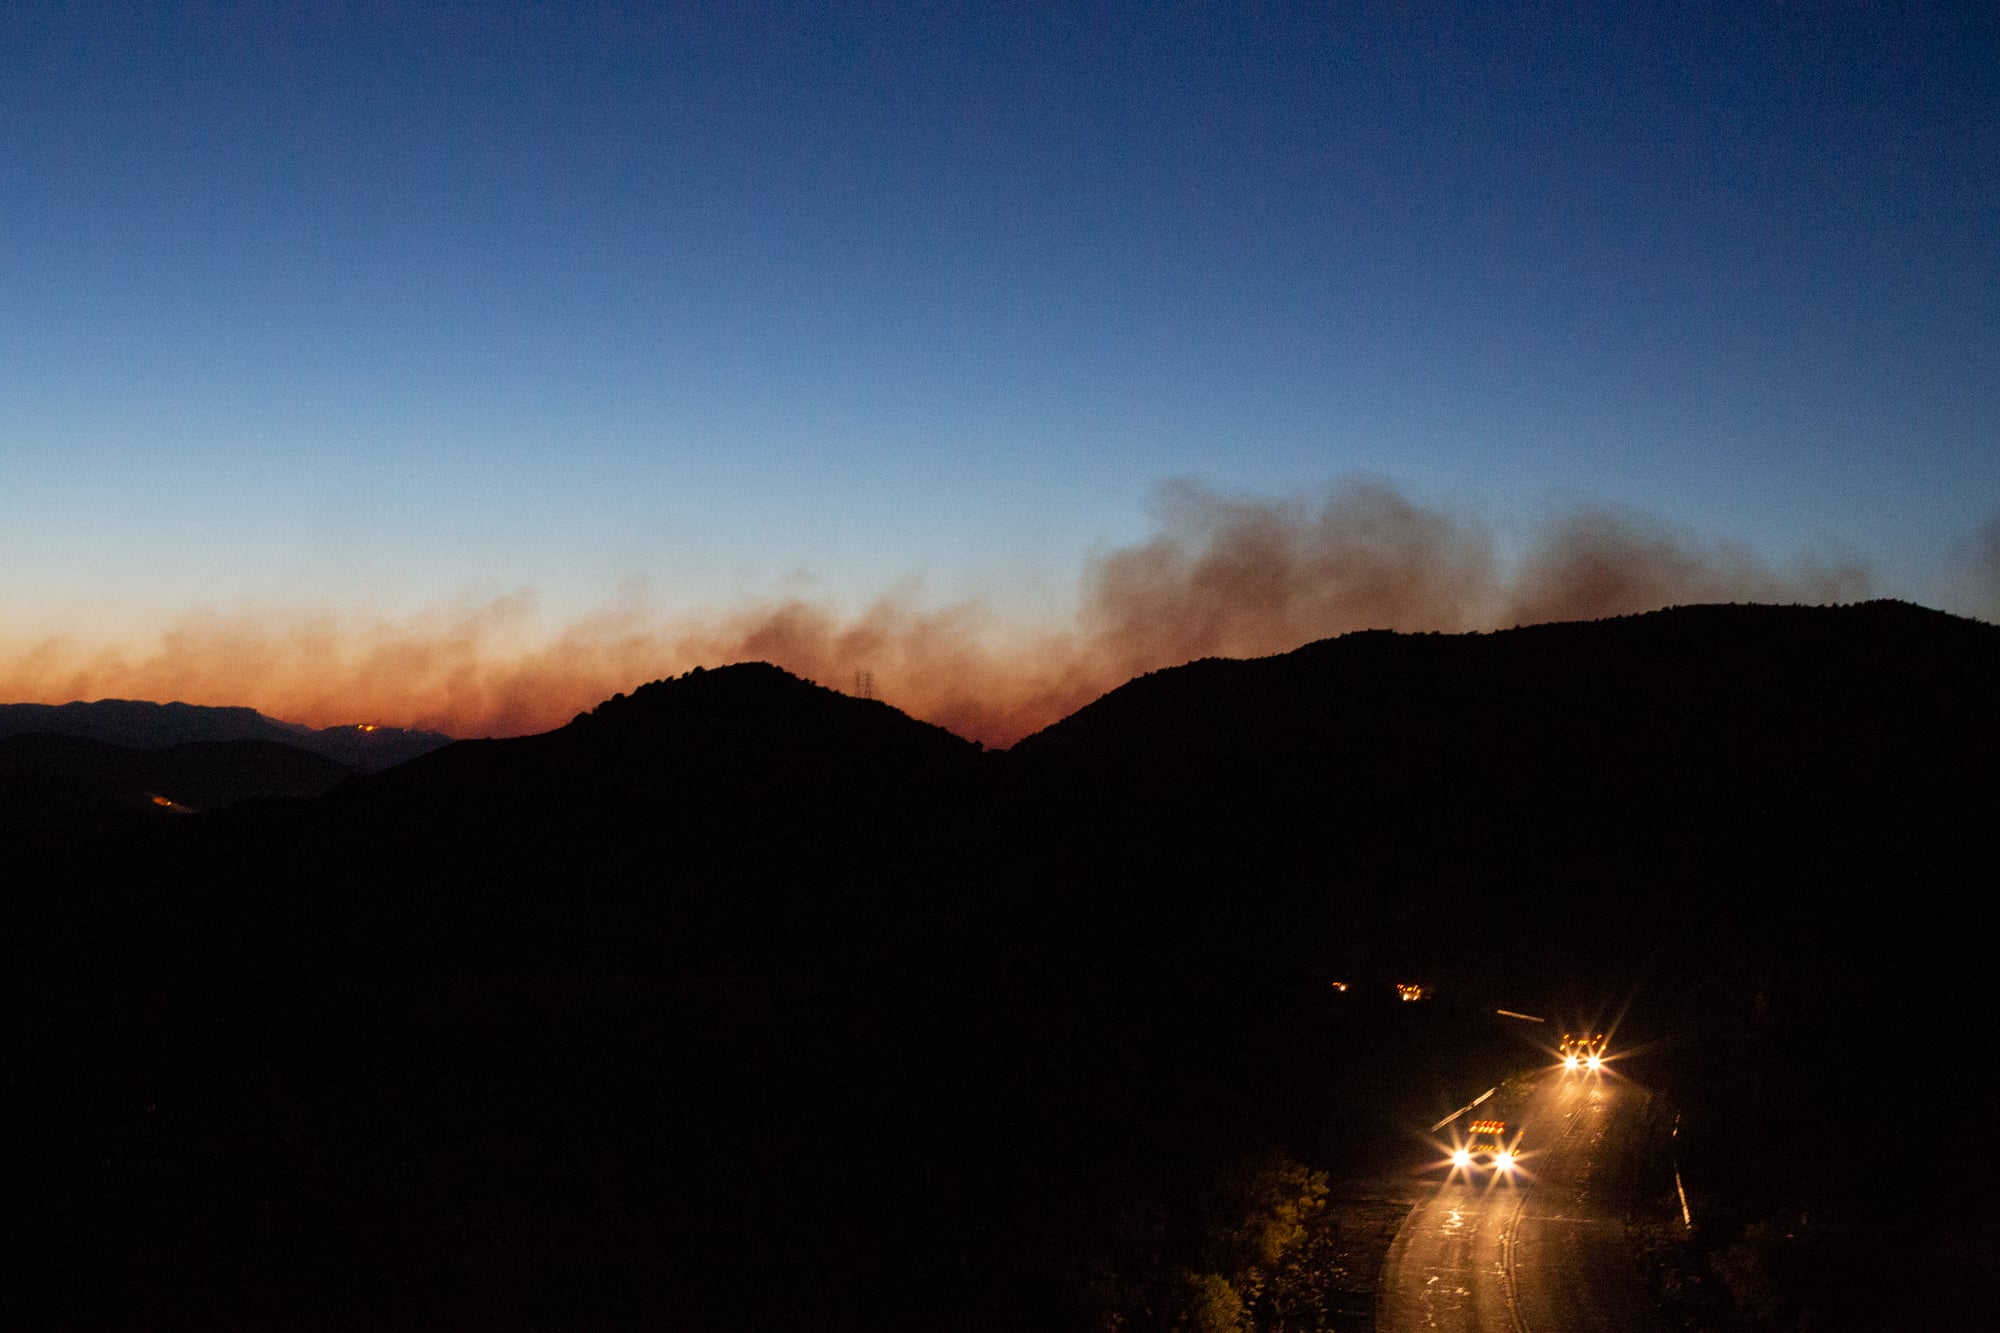 Hotshot crews return to their camps as smoke from the Woodbury Fire rises over the Superstition Wilderness in central Arizona. (Anton L. Delgado/News21)